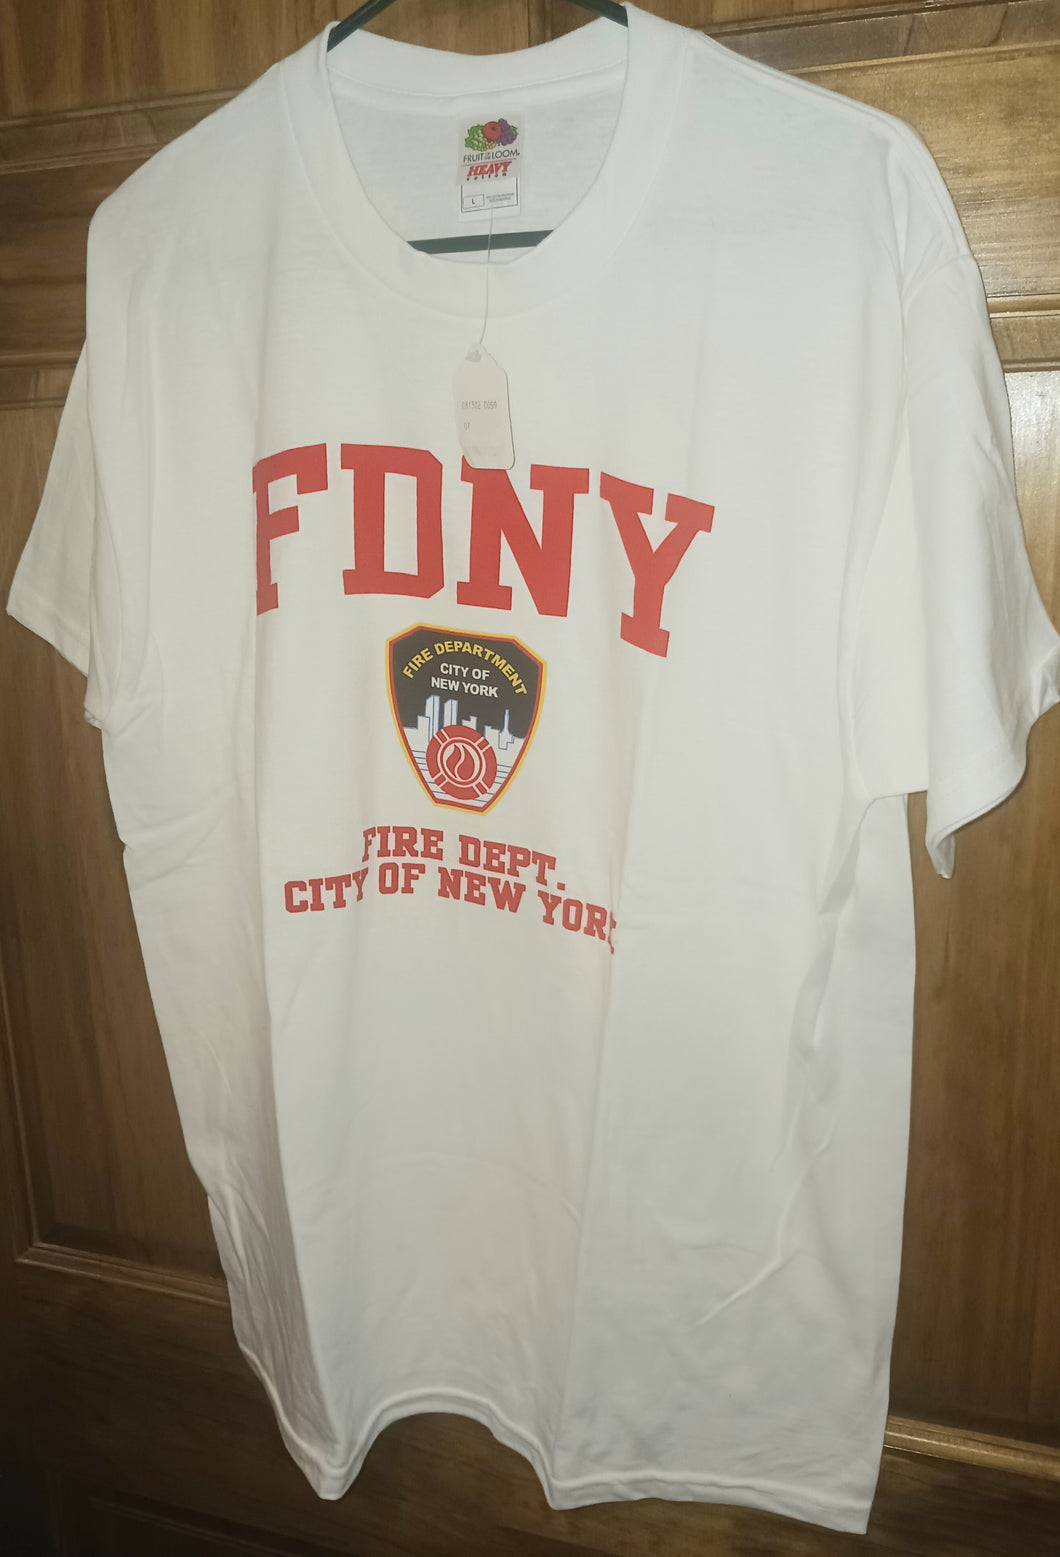 Vintage FDNY Fire Department City of New York White T-Shirt NWT New Medium and Large 2002 Fruit of the Loom